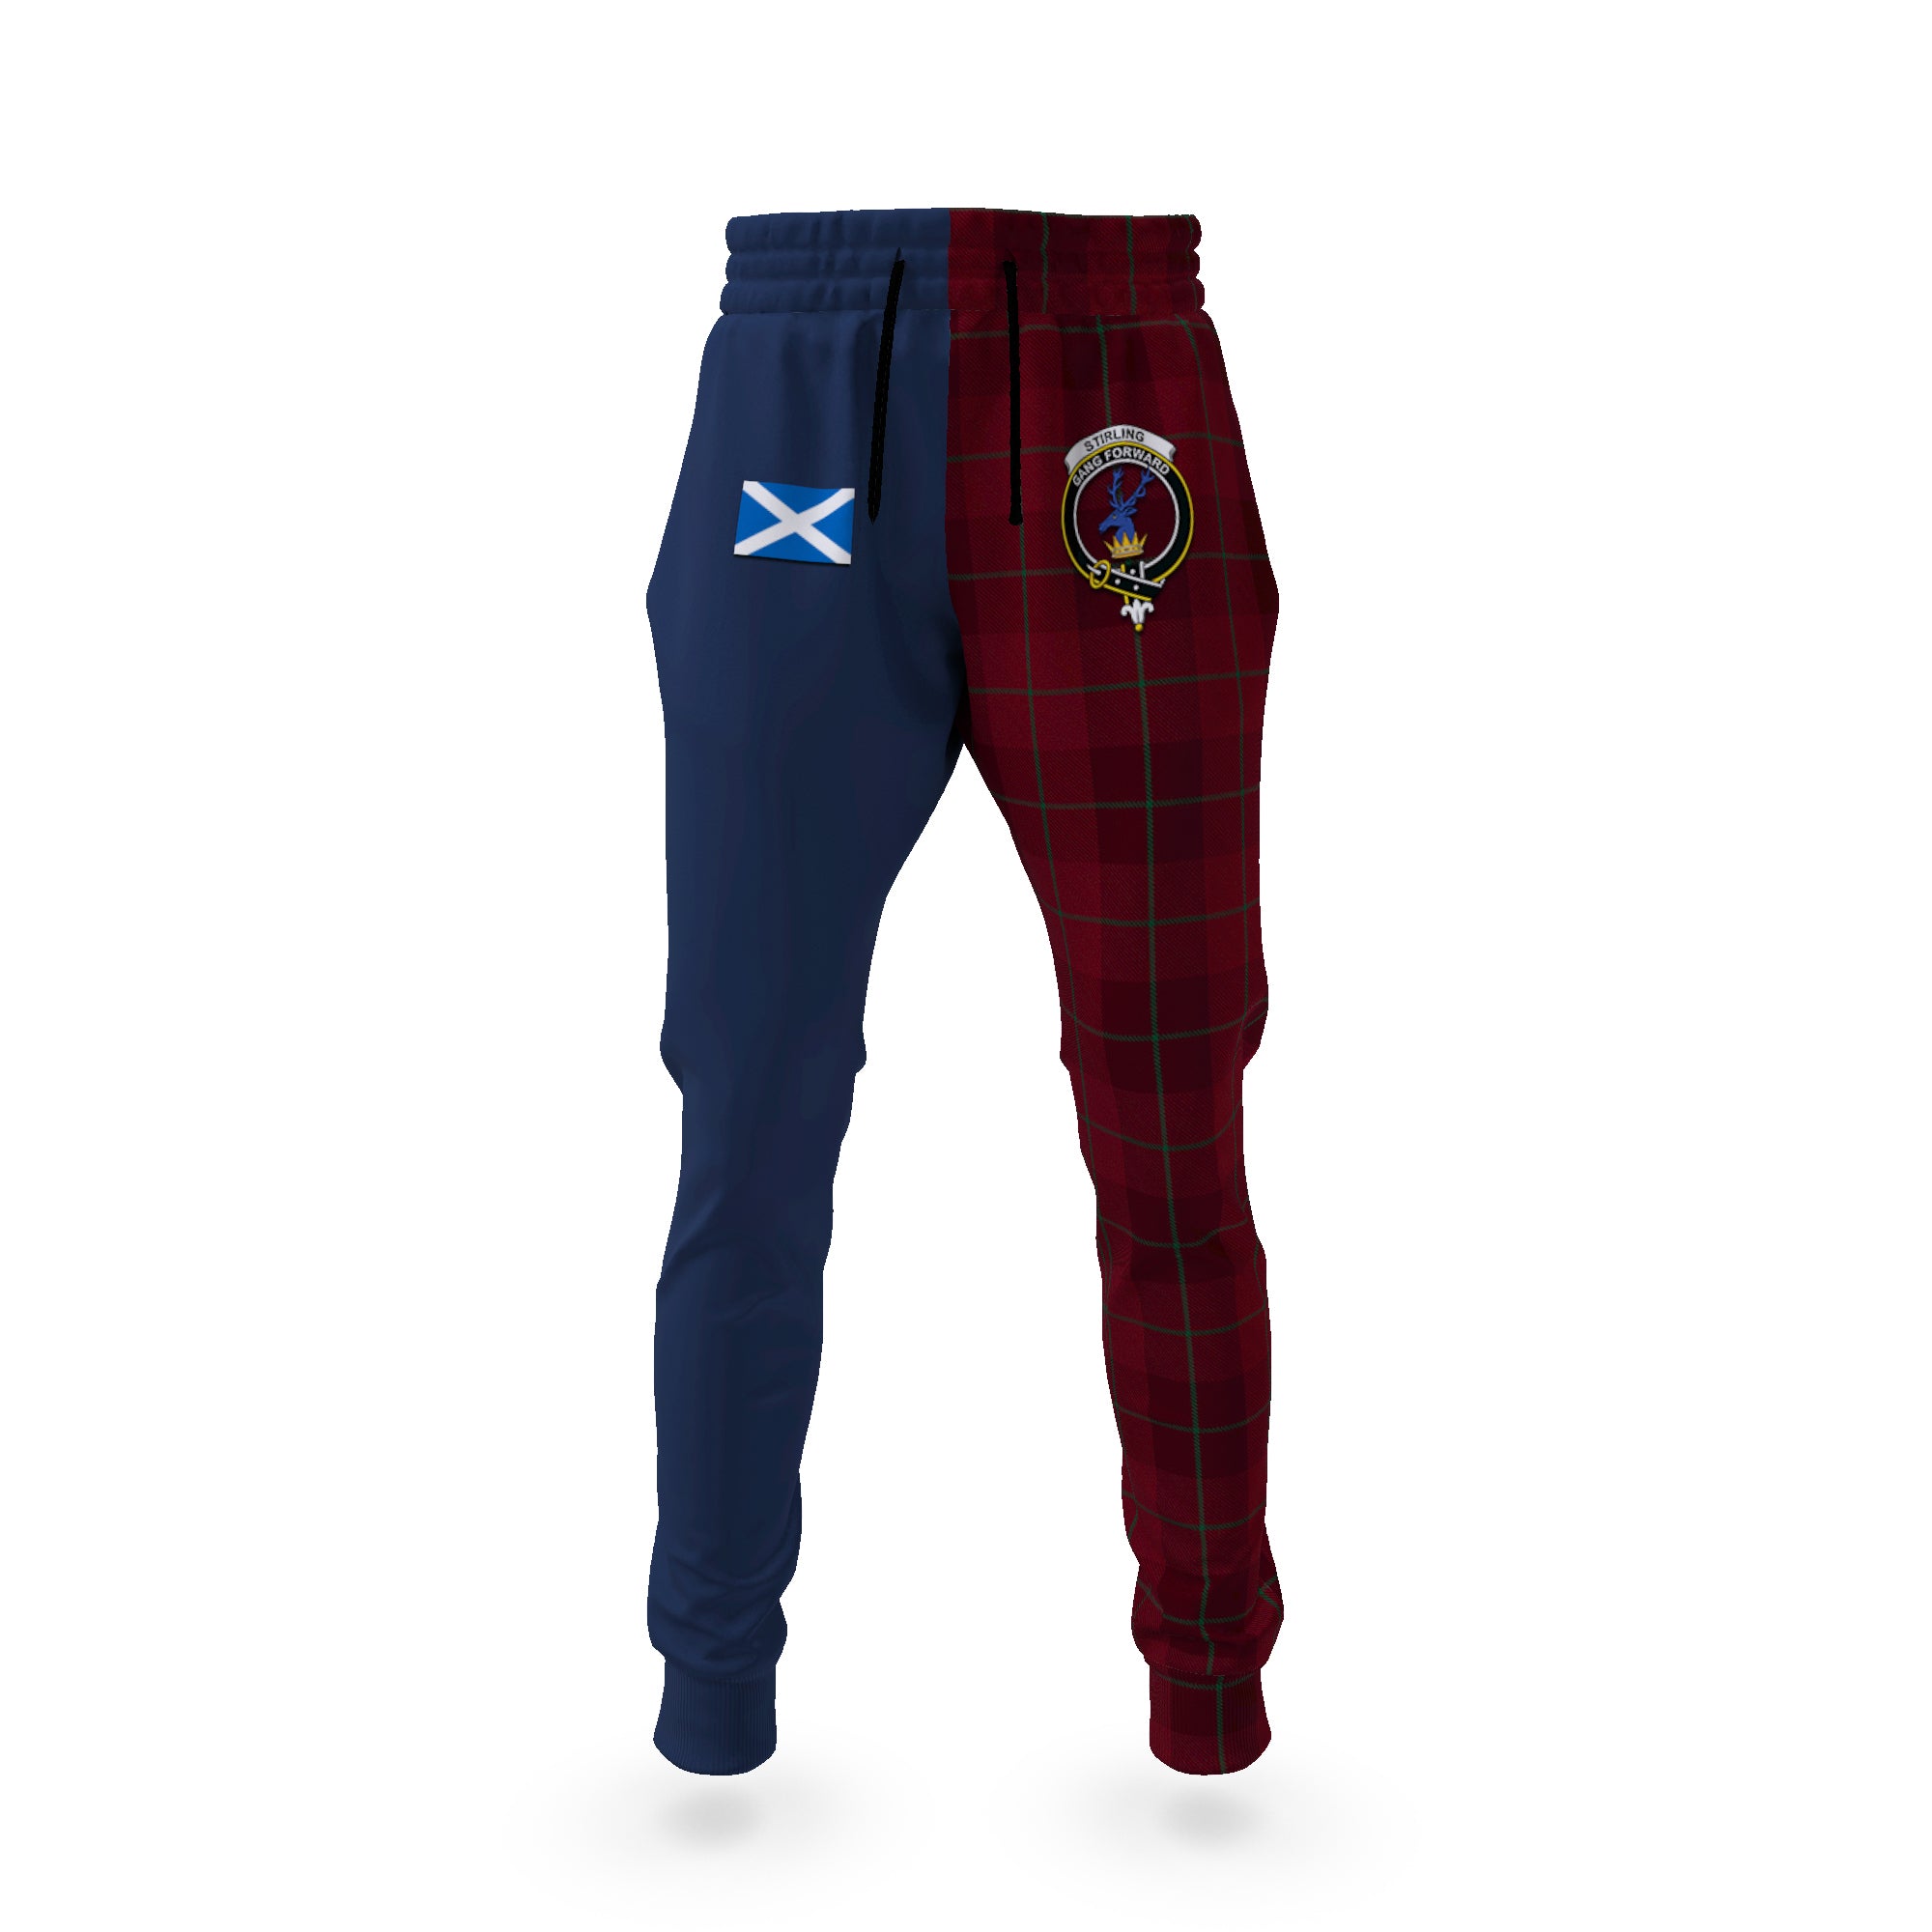 stirling-of-keir-tartan-plaid-joggers-family-crest-tartan-joggers-with-scottish-flag-half-style